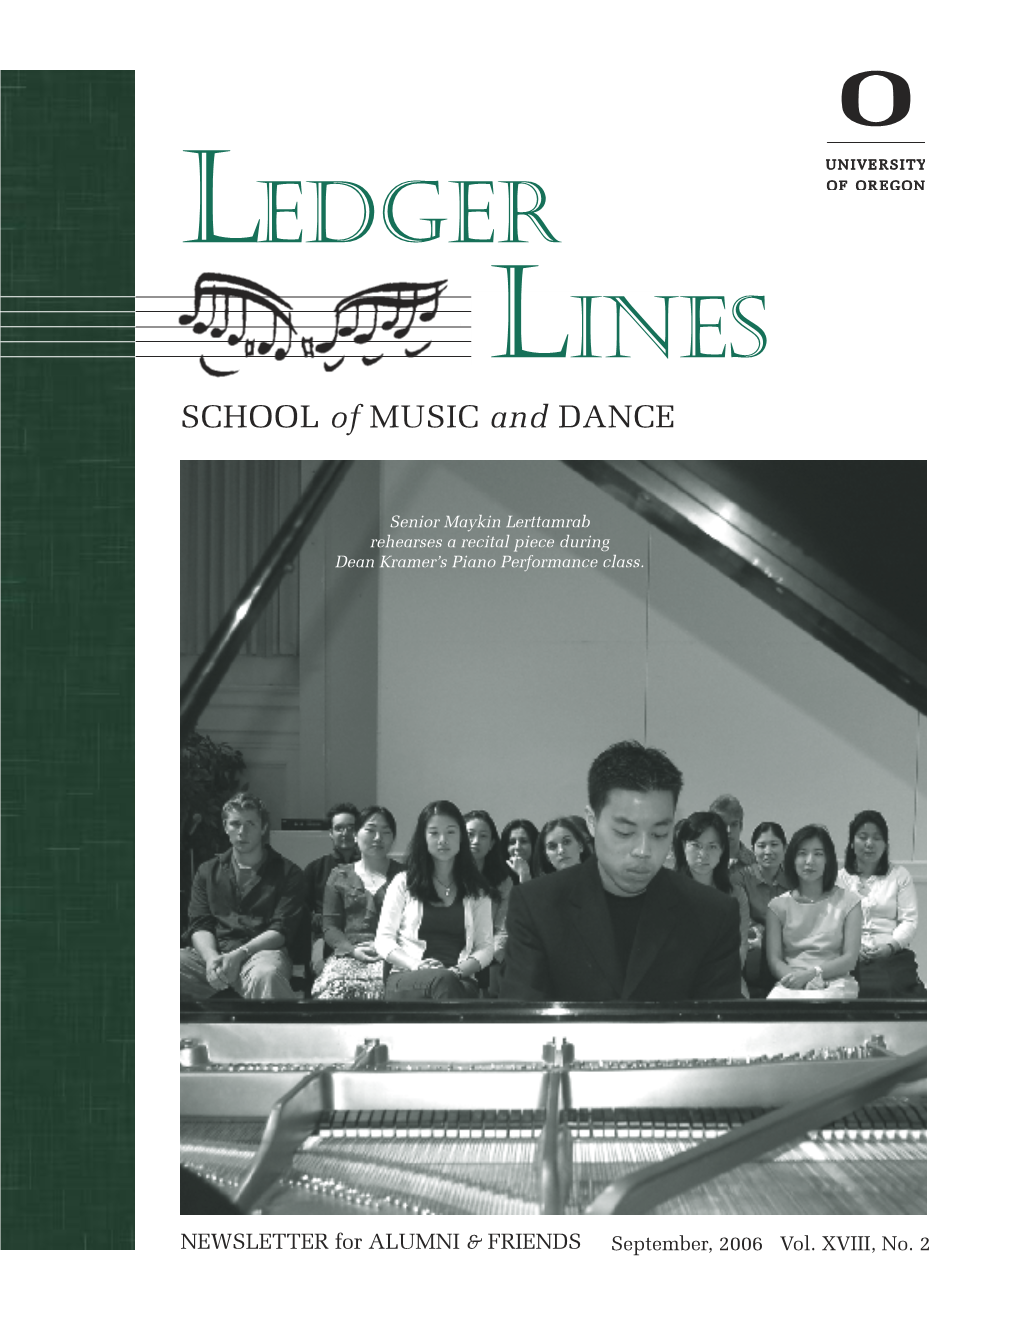 LEDGER LINES SCHOOL of MUSIC and DANCE